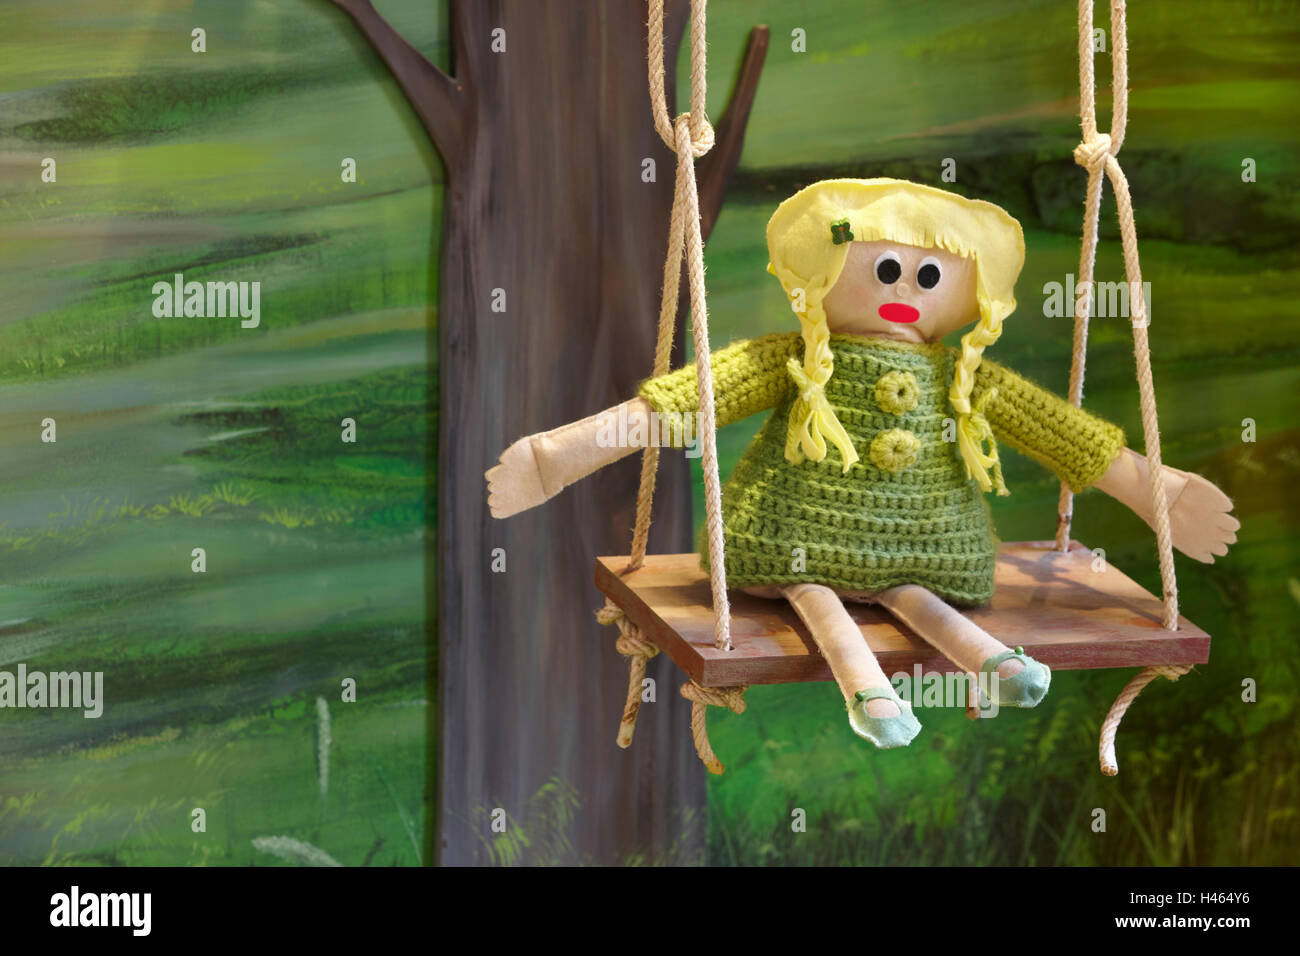 Stuffed doll over a swing with a forest background. Horizontal Stock Photo